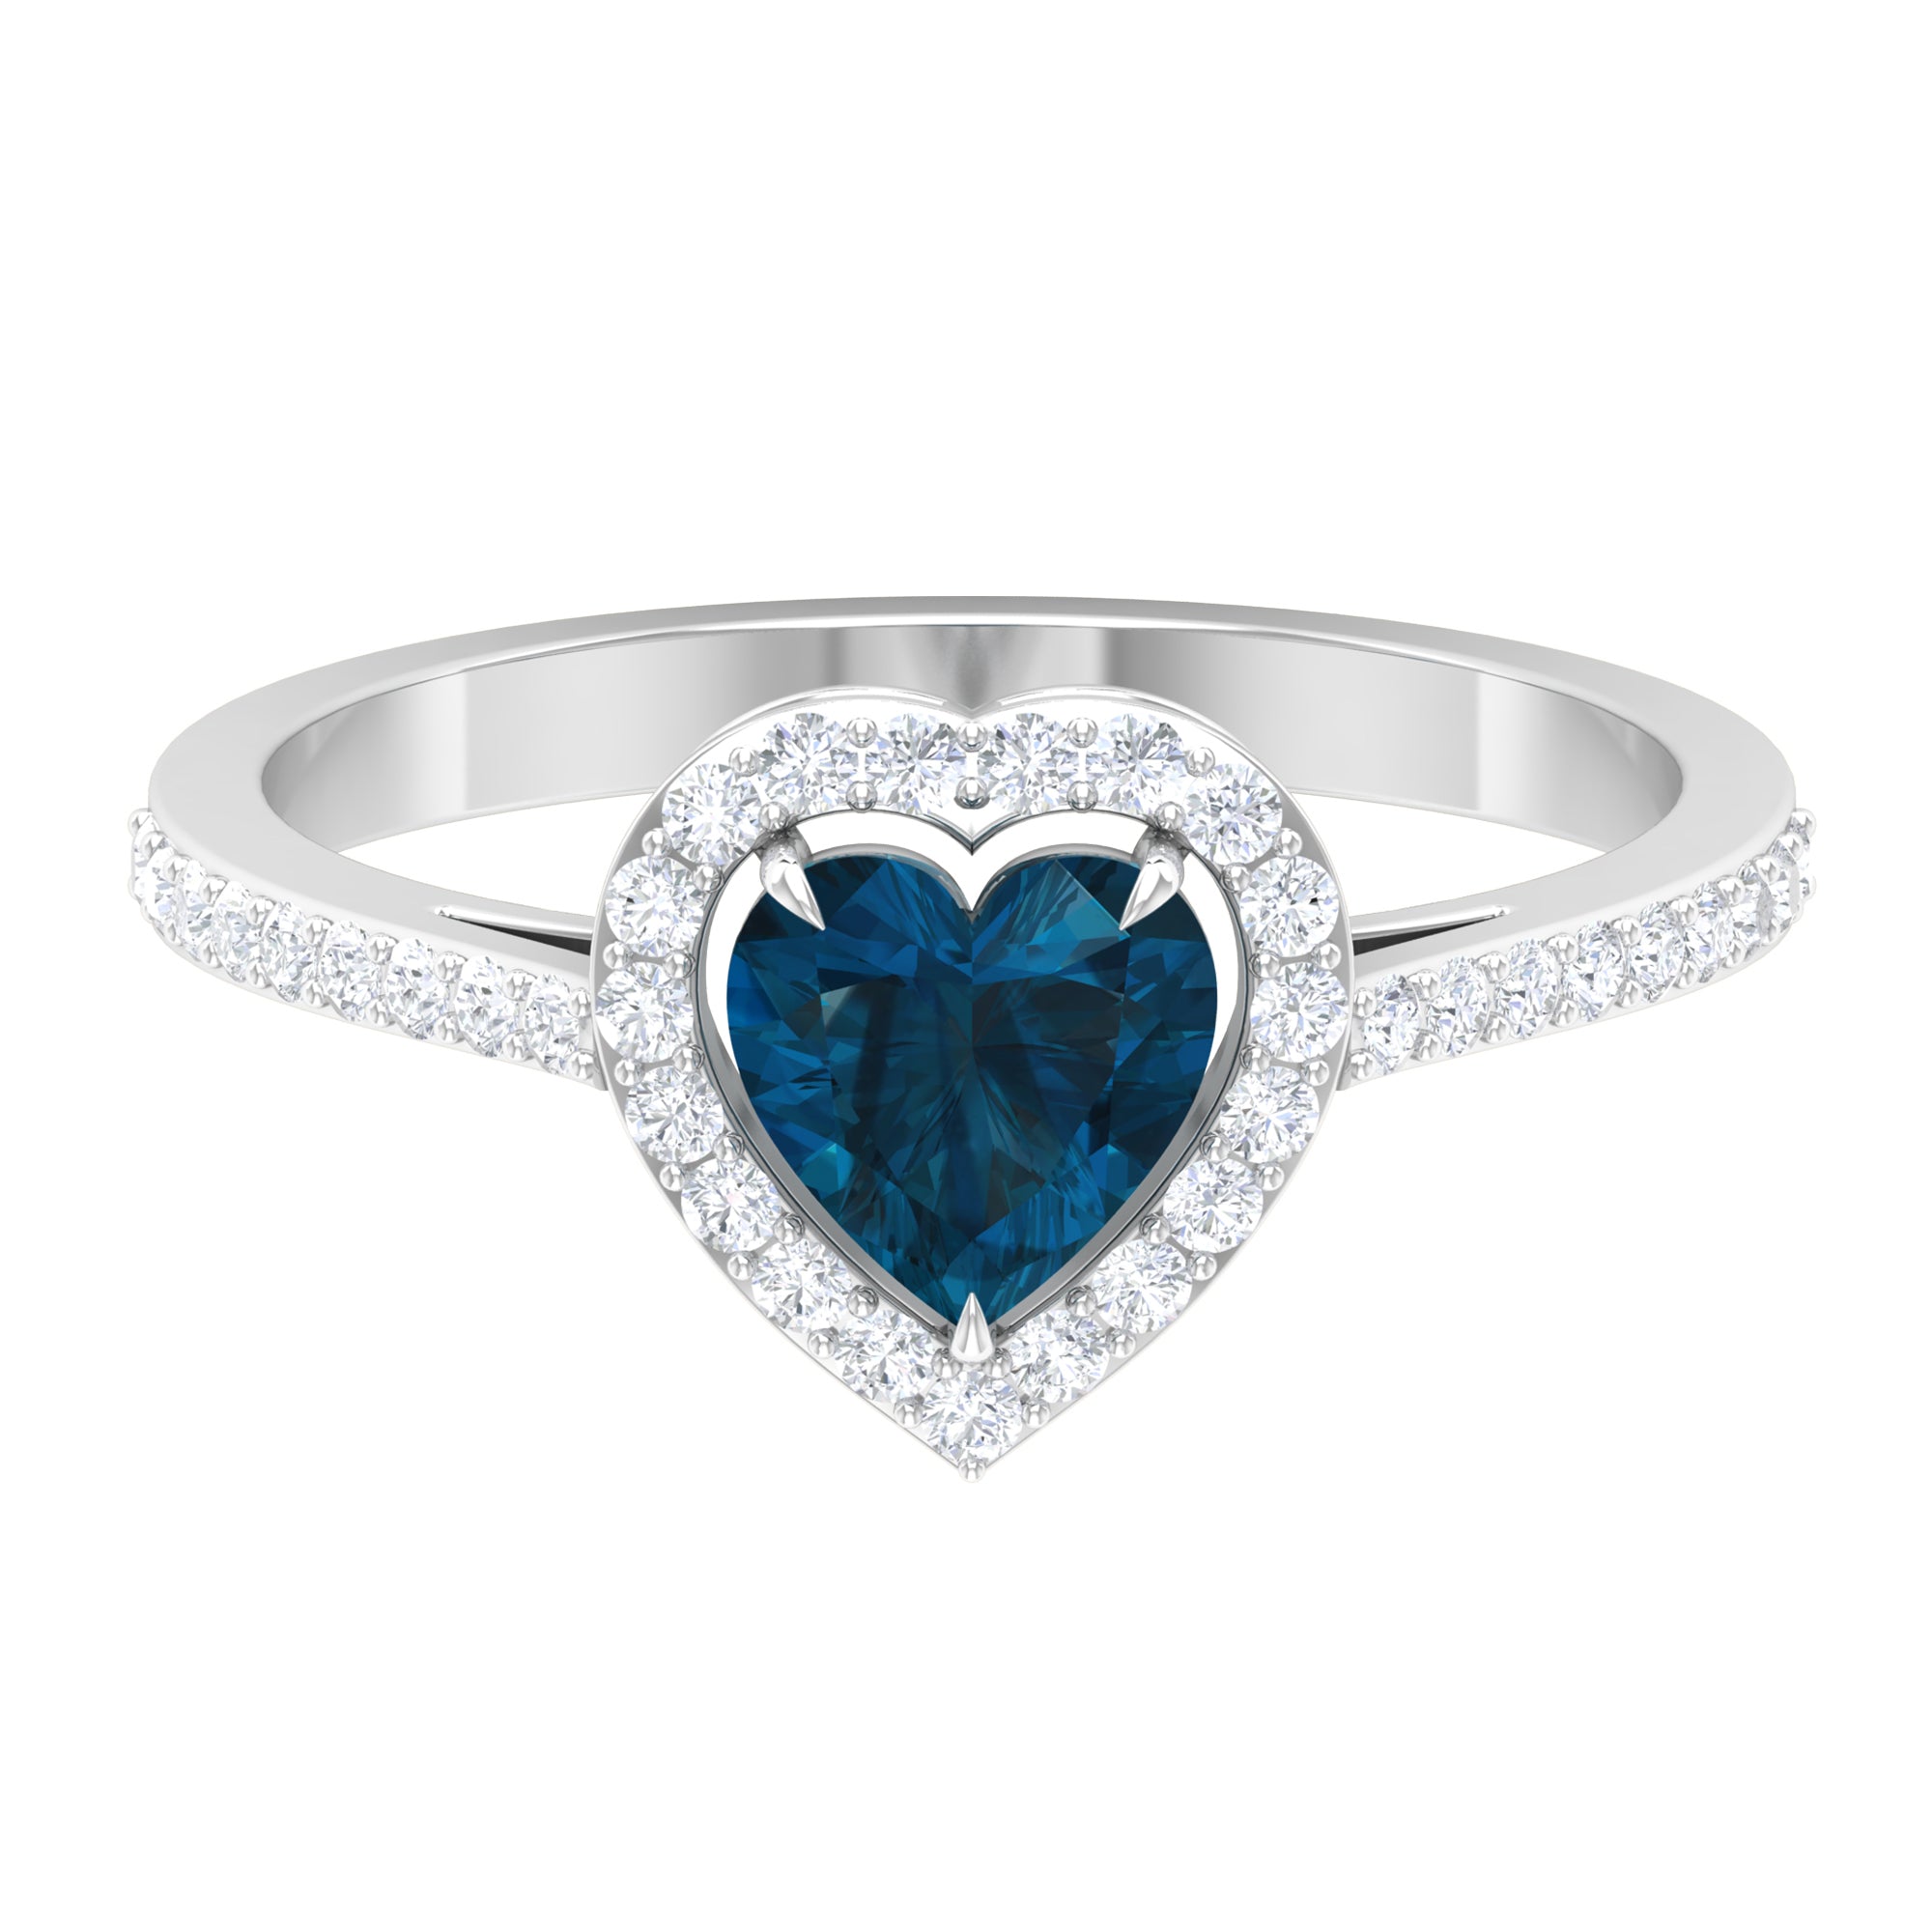 1.50 CT Heart Shape London Blue Topaz Engagement Ring with Diamond